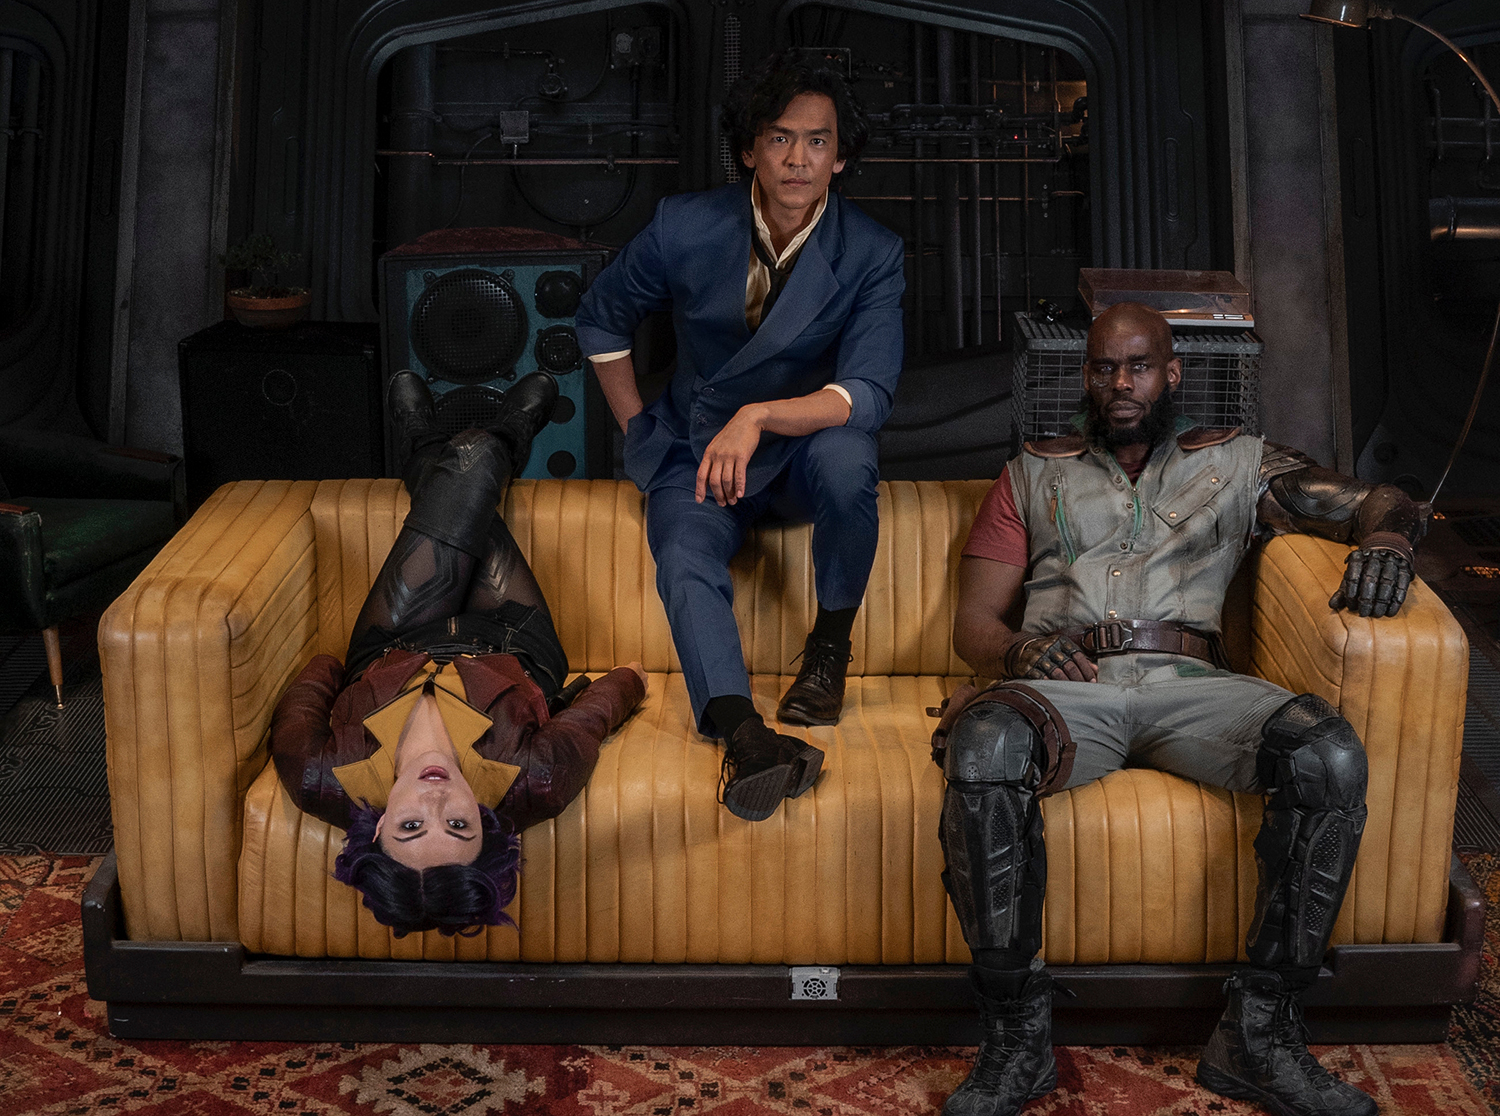 Netflix's live-action 'Cowboy Bebop' stars Daniella Pineda as Faye Valentine, John Cho as Spike Spiegel, and Mustafa Shakir as Jet Black, all of whom are introduced during the opening credits